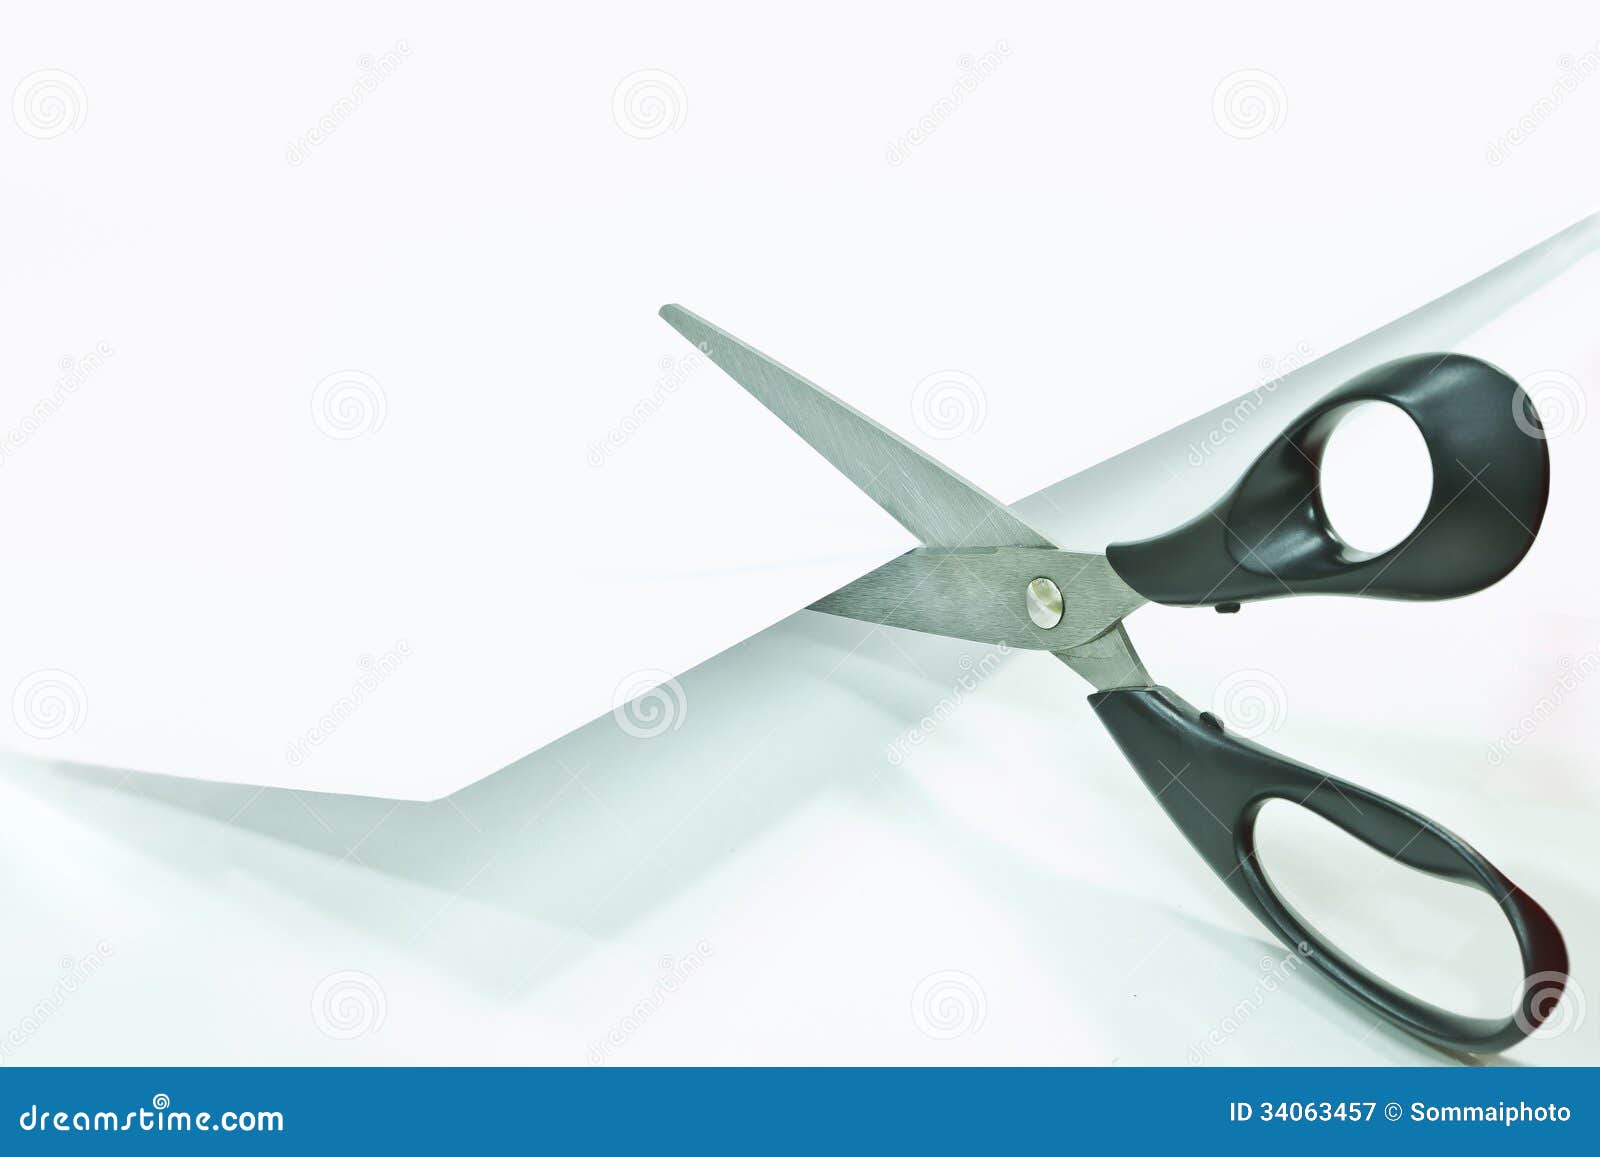 Cut Cardboard with Scissors Isolated on White Background Stock